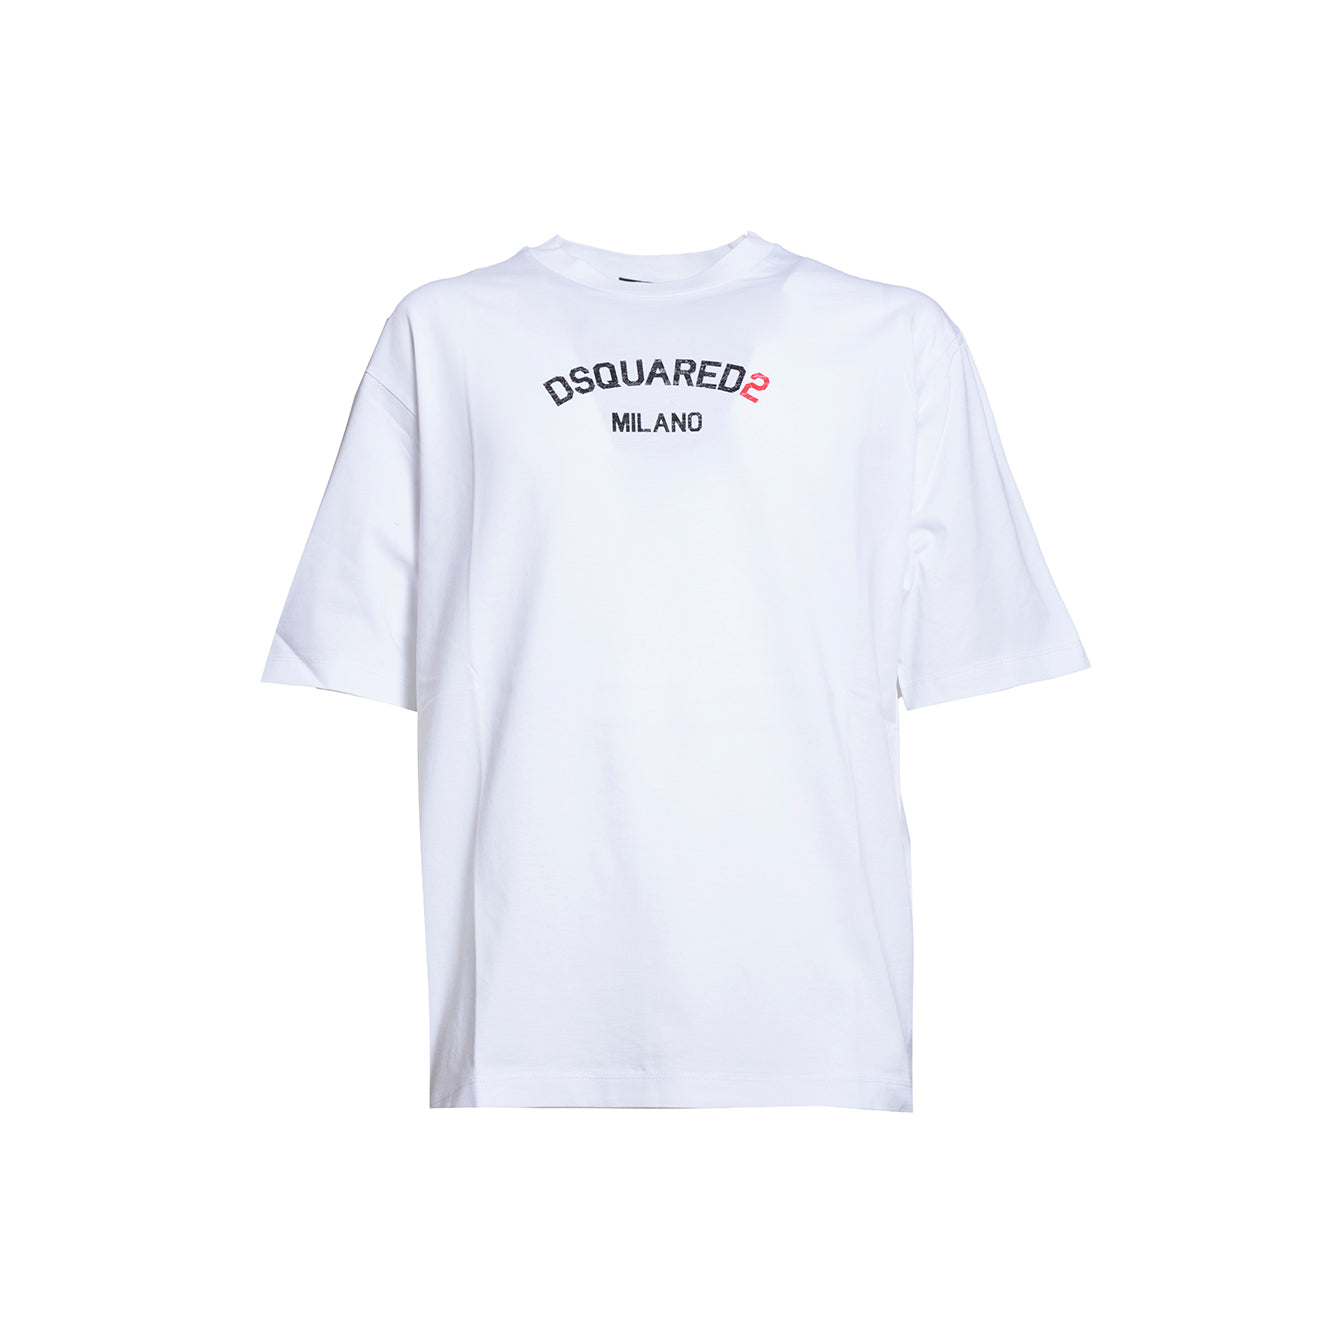 T-shirt Loose Fit in cotone bianco con stampa Dsquared2